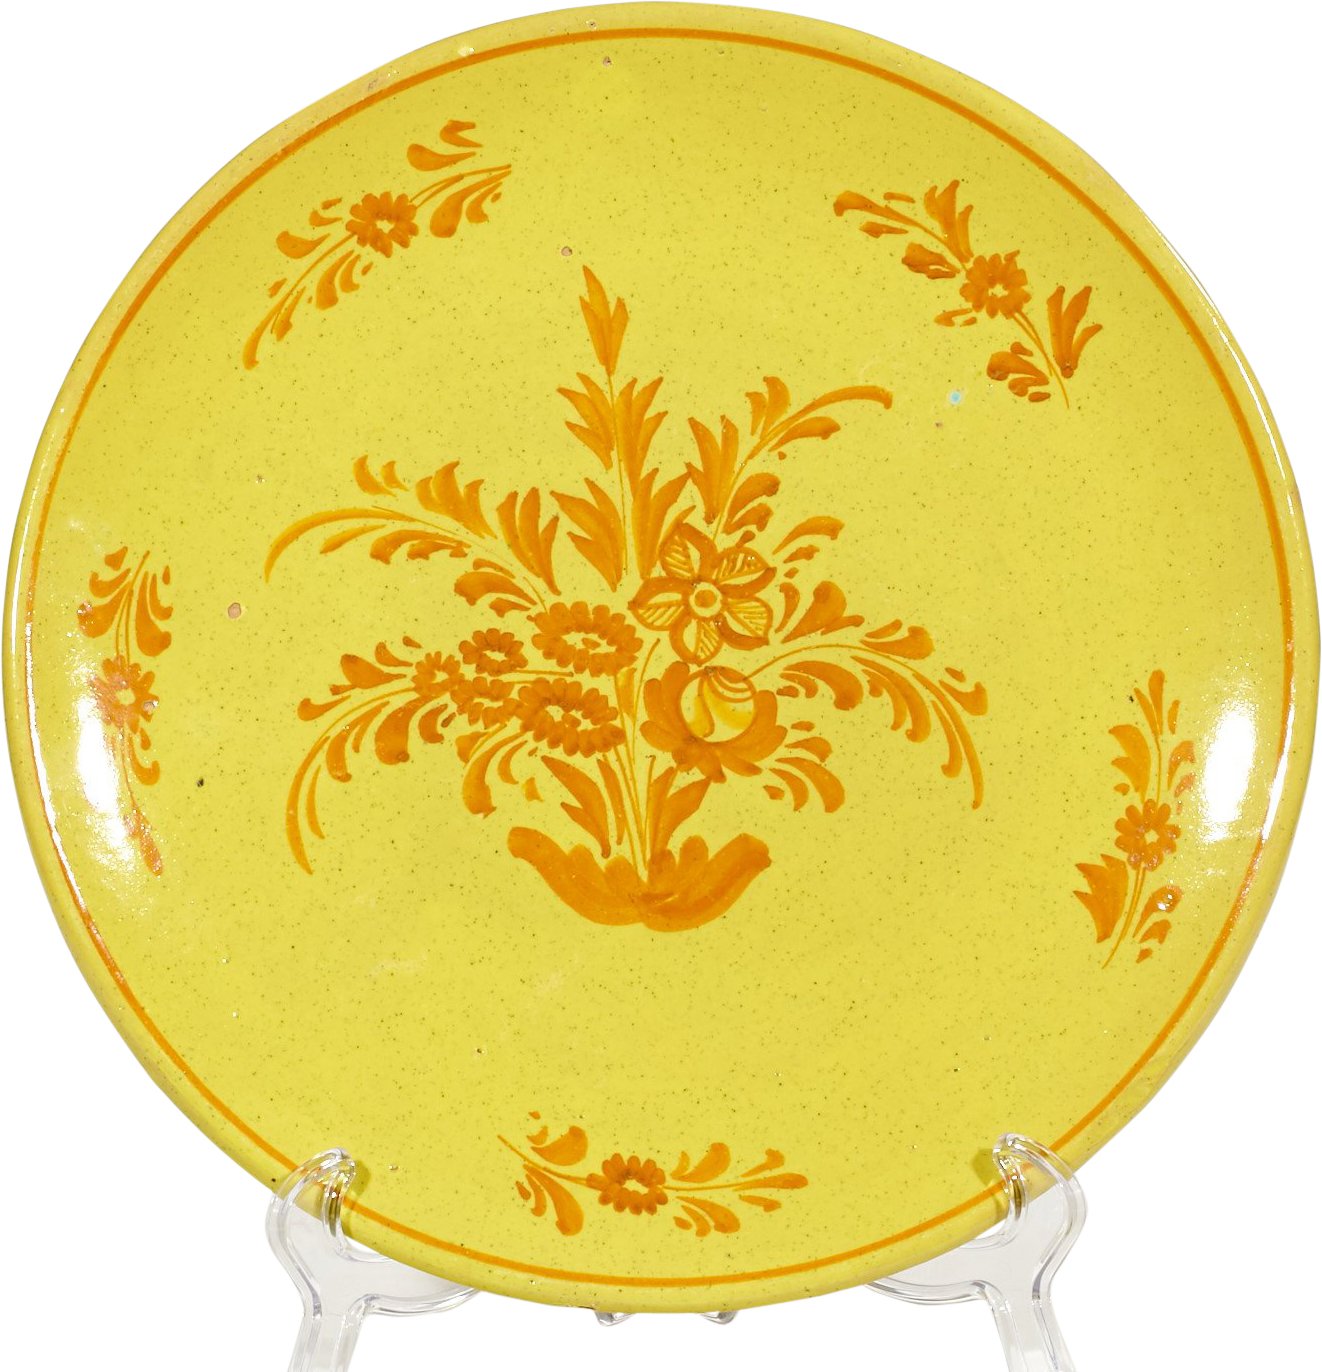 1960s Italian Hand-Painted Floral Plate~P77131709